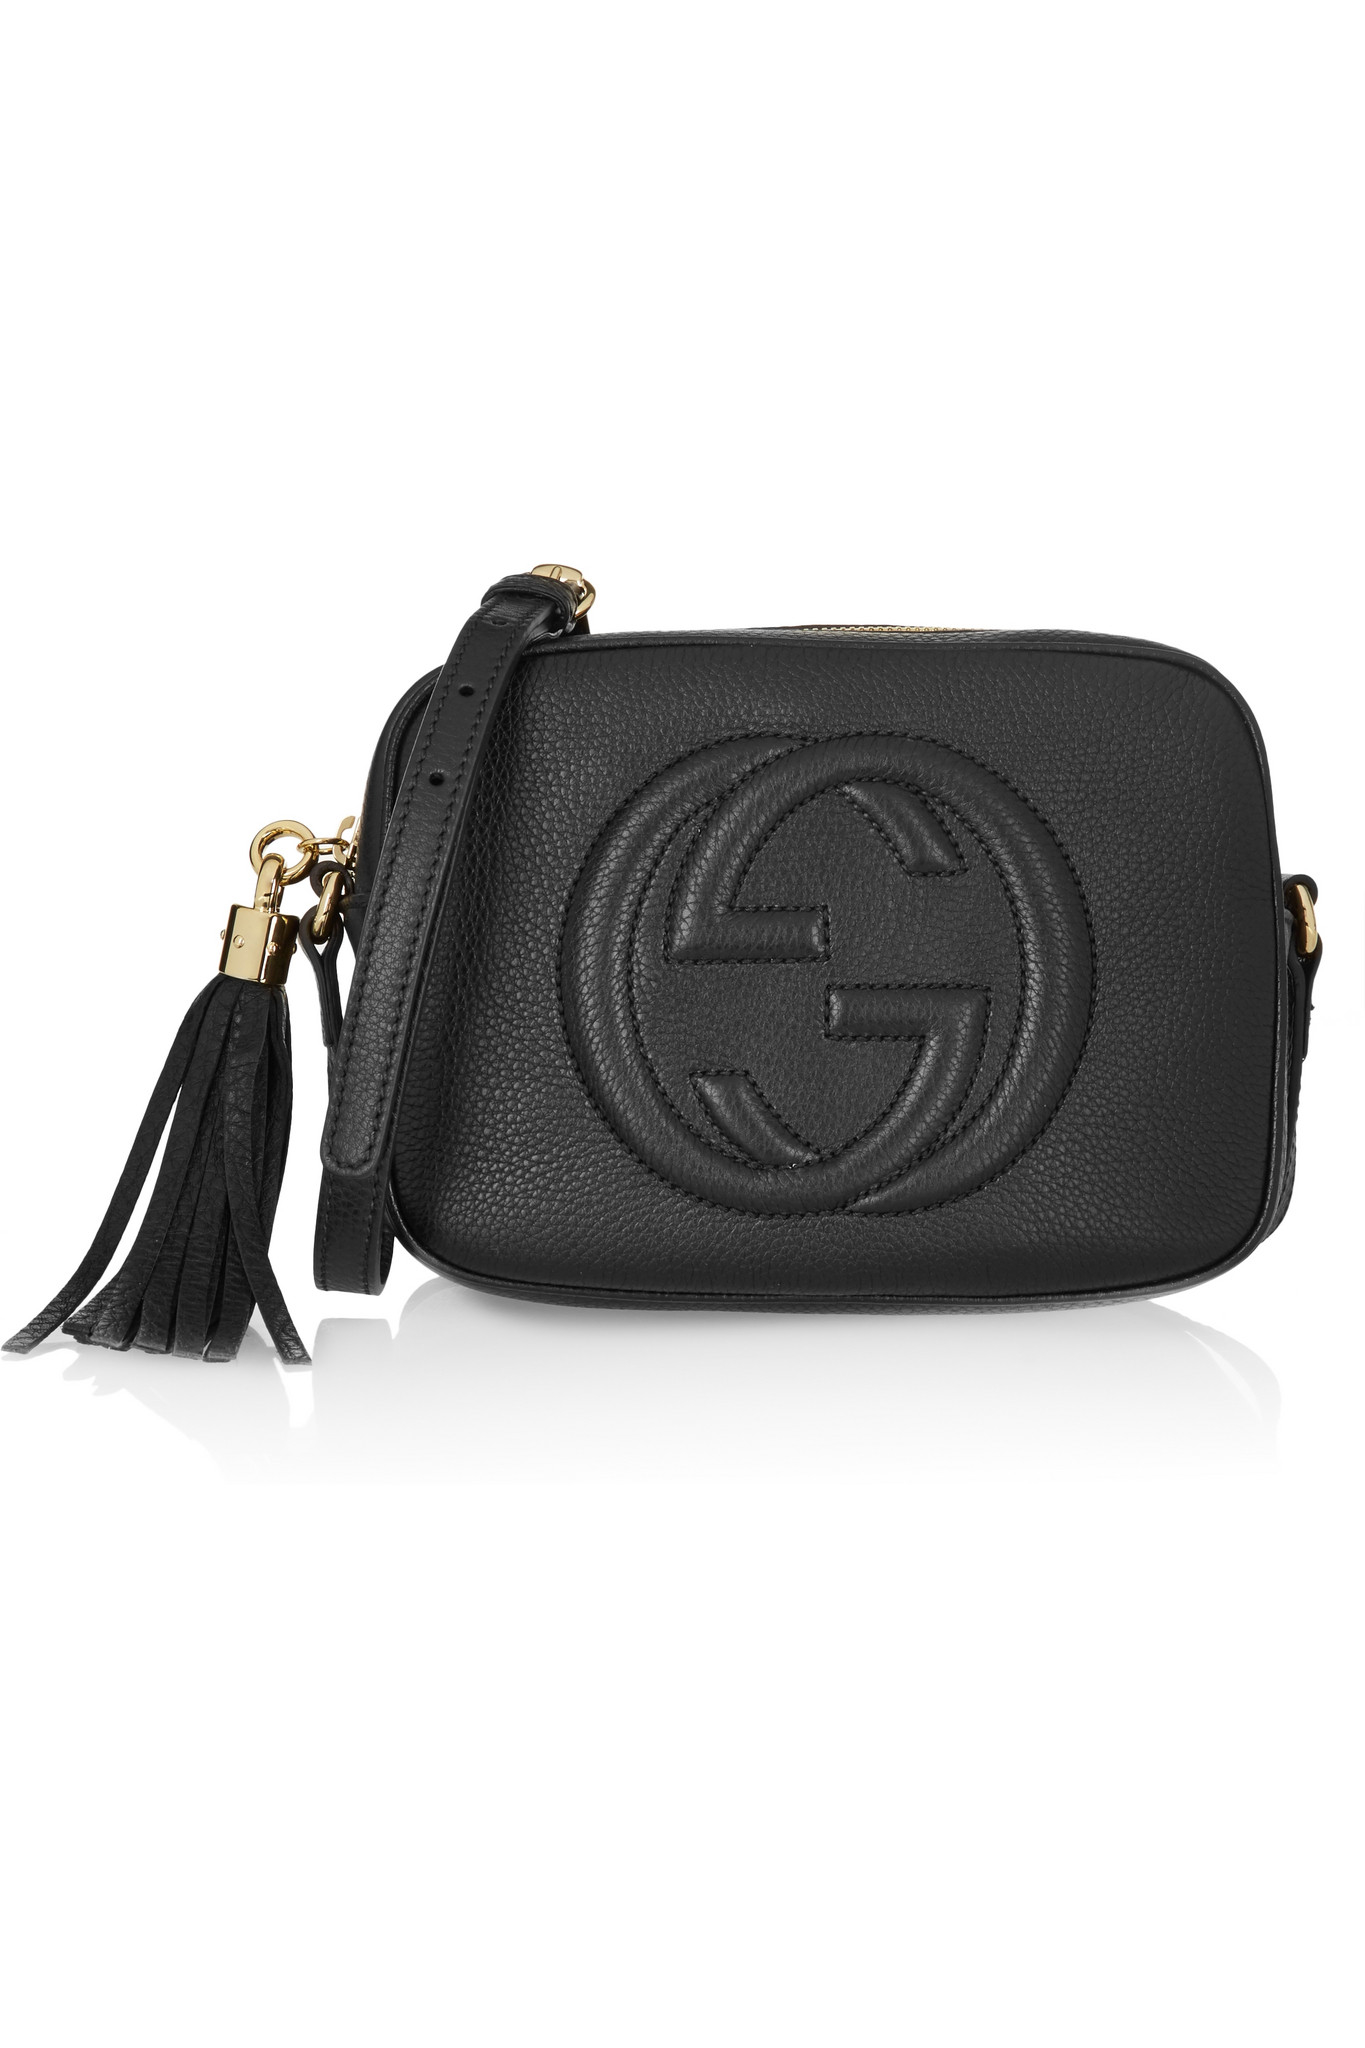 Lyst - Gucci Soho Disco Textured-leather Shoulder Bag in Black